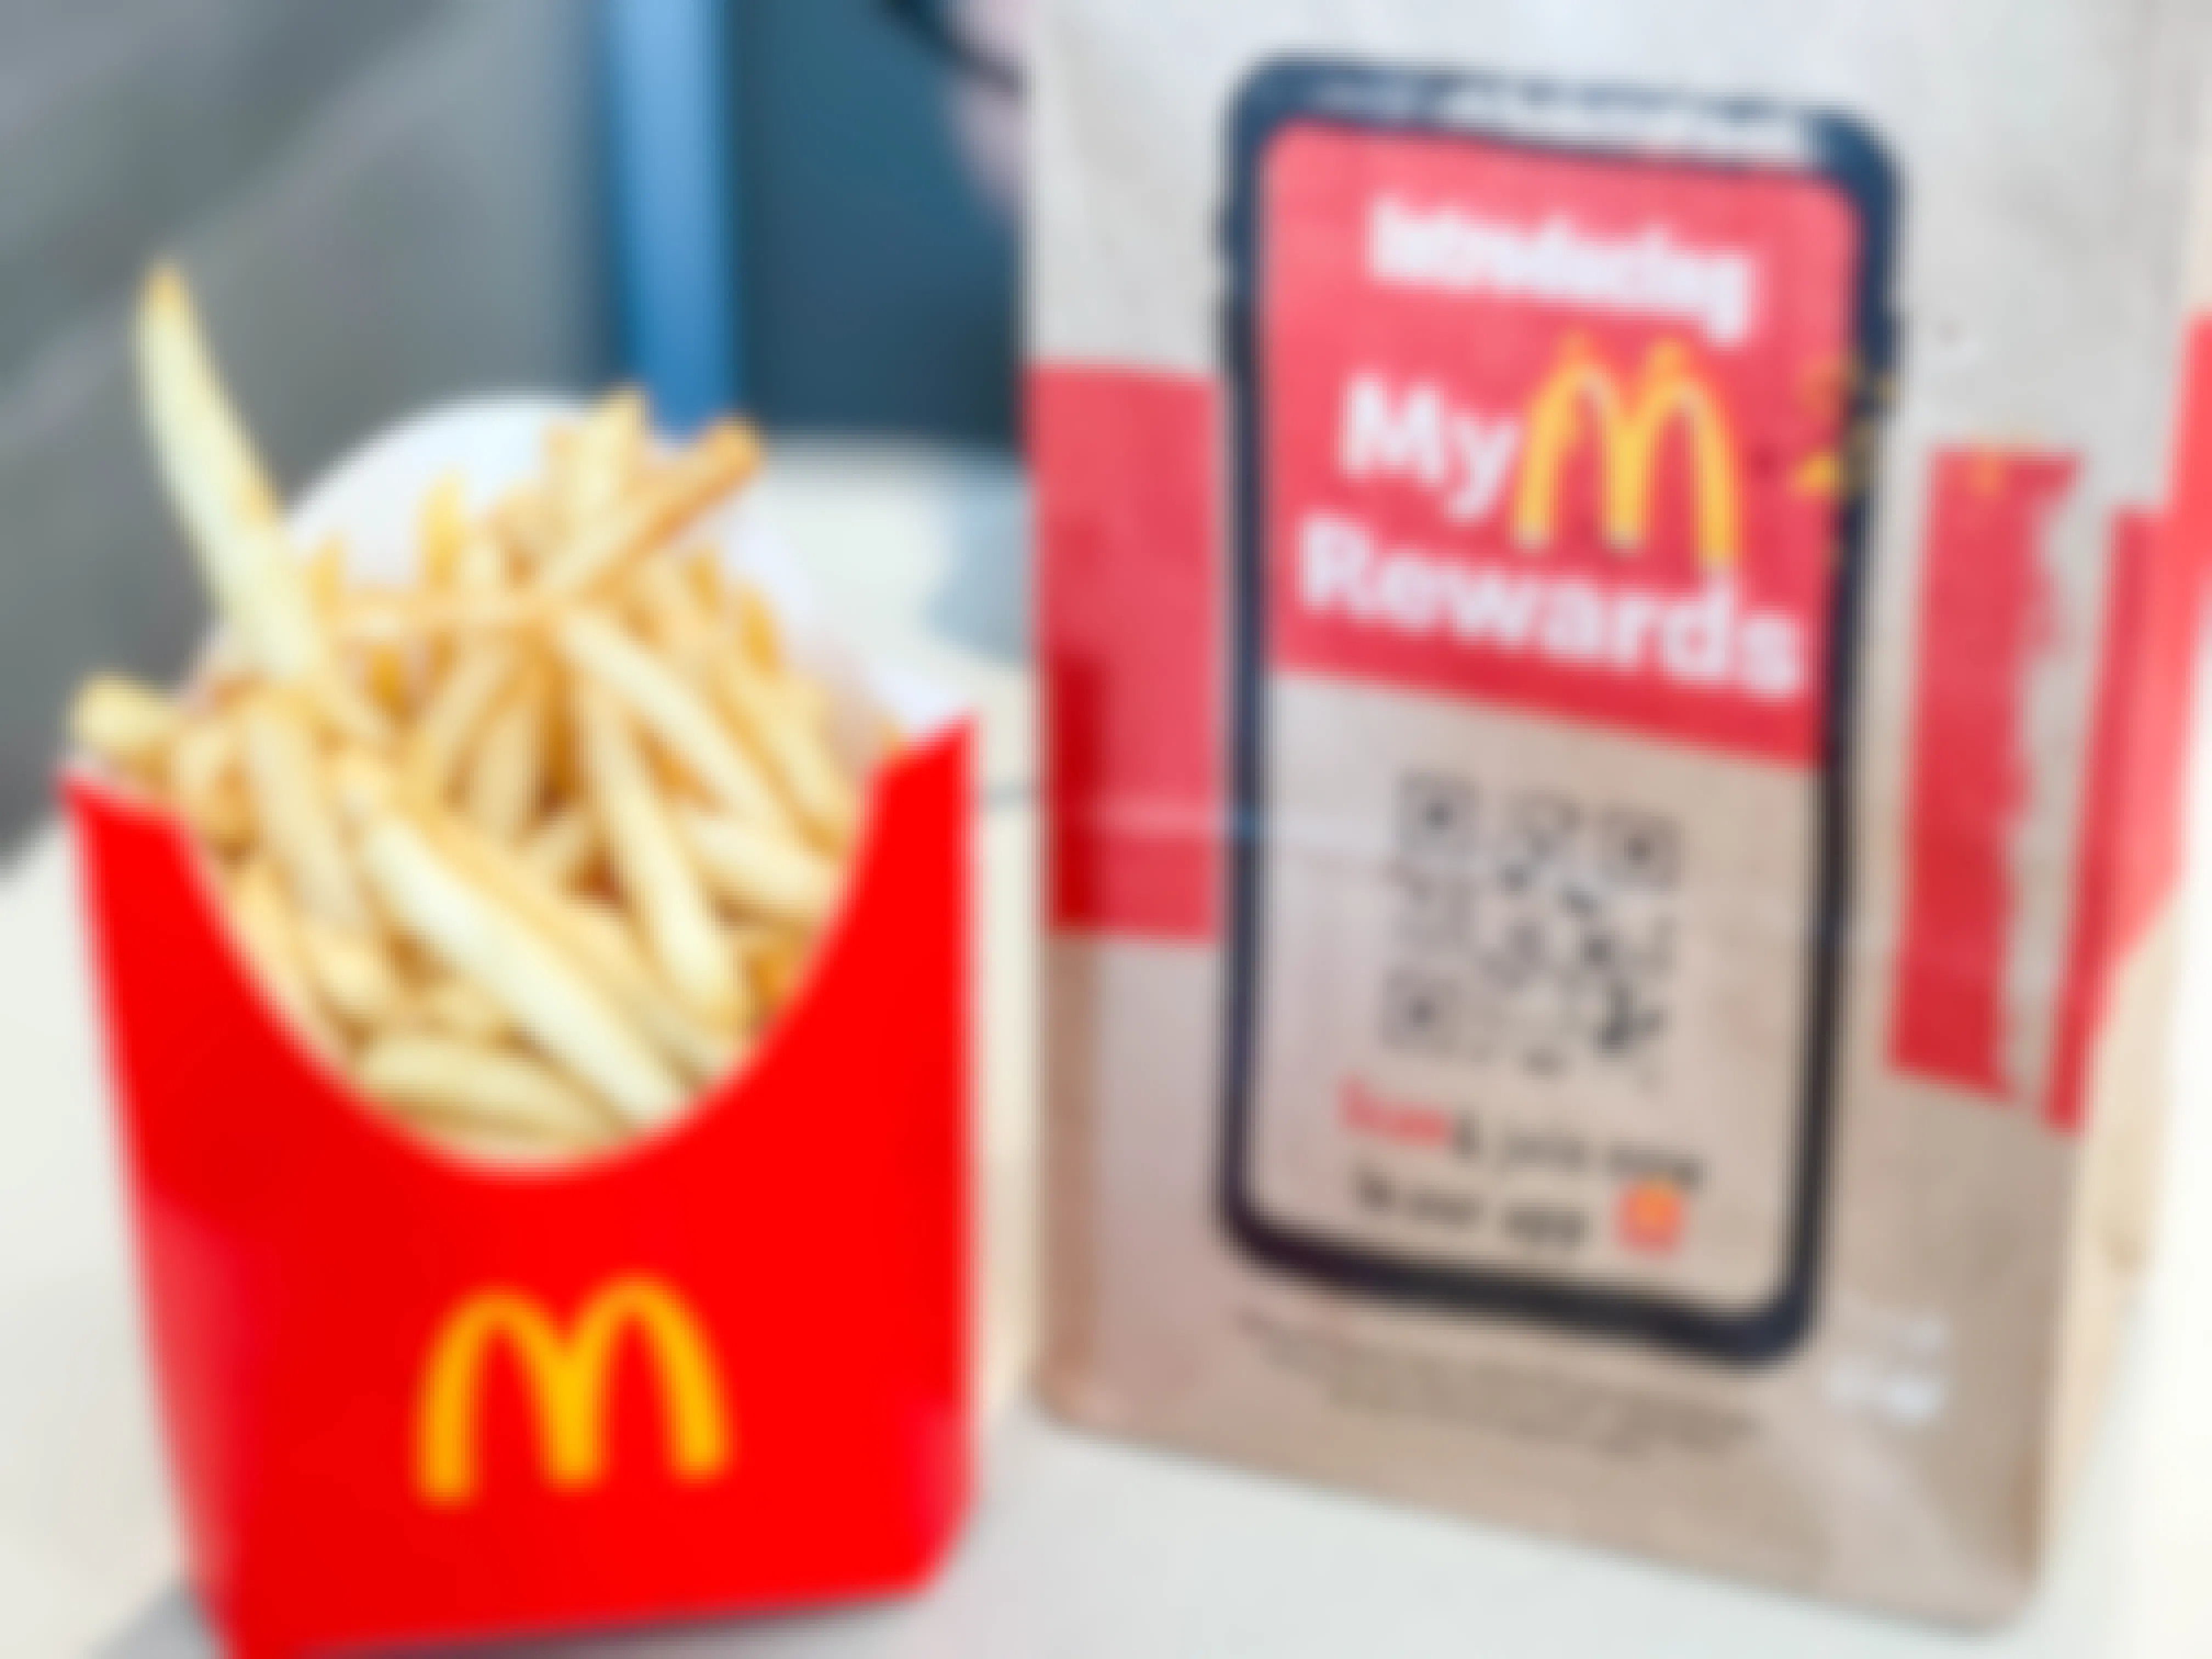 A box of McDonald's fries sitting on a table next to a takeout bag advertising My McDonald's Rewards app with a QR code.